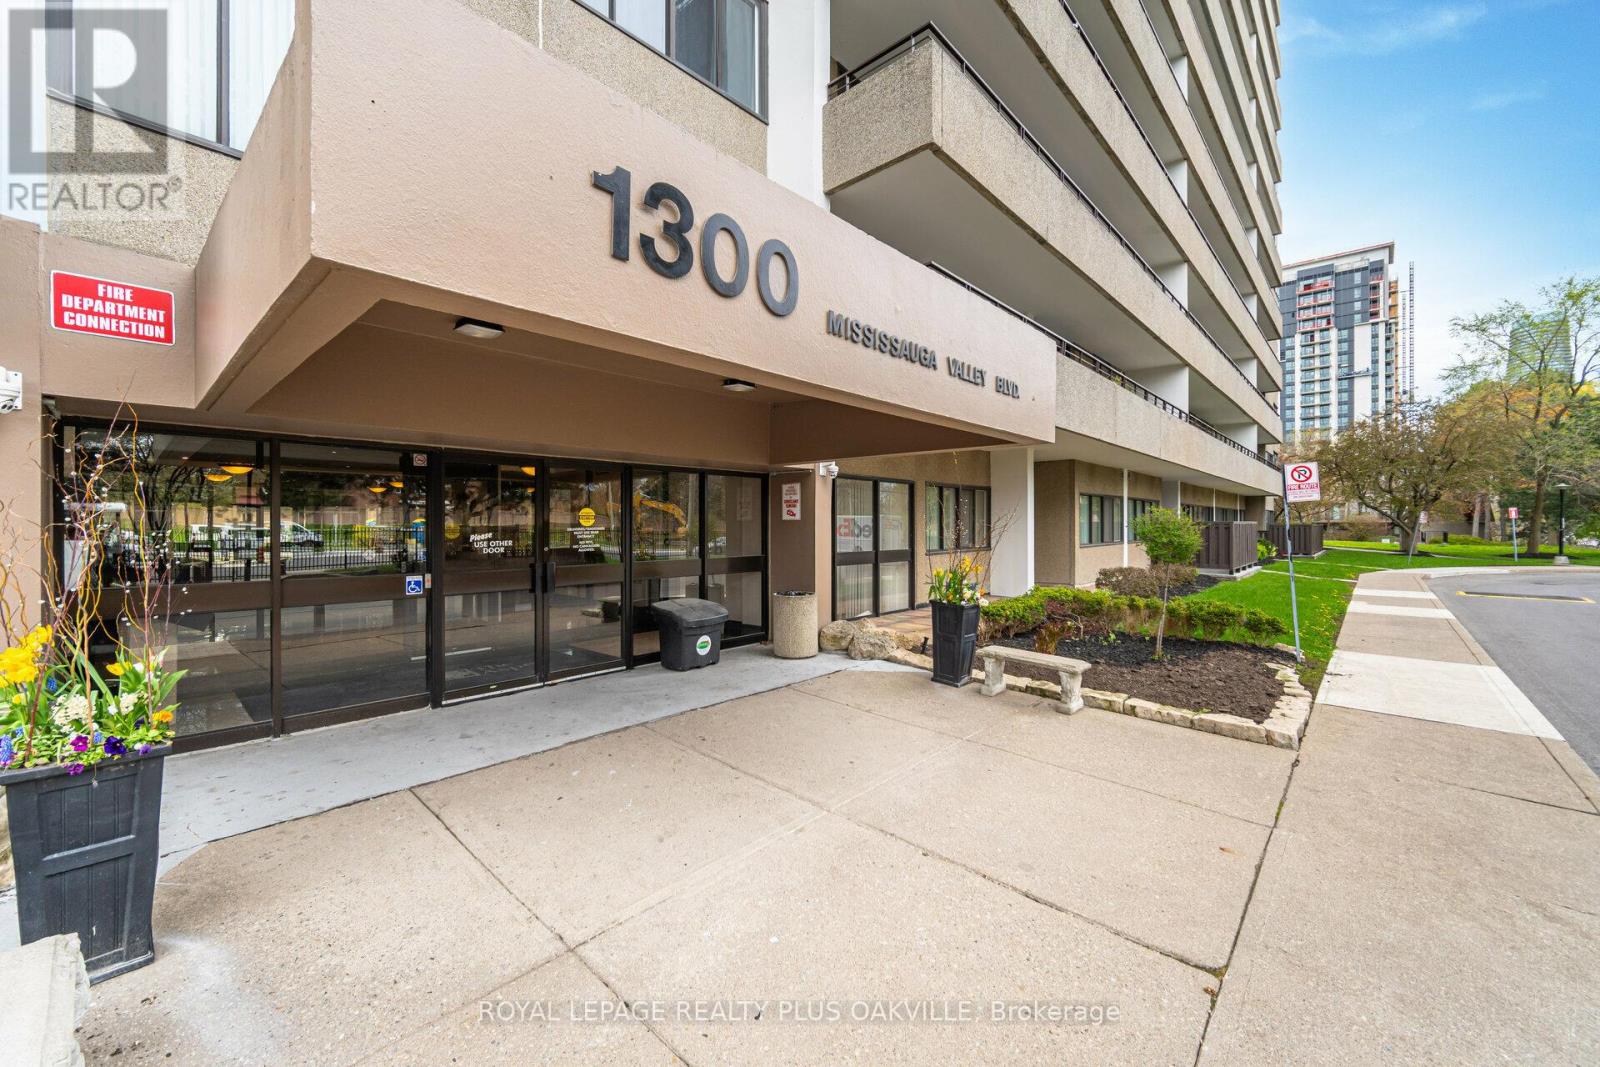 1002 - 1300 Mississauga Valley Boulevard, Mississauga, Ontario  L5A 3S8 - Photo 2 - W8310270